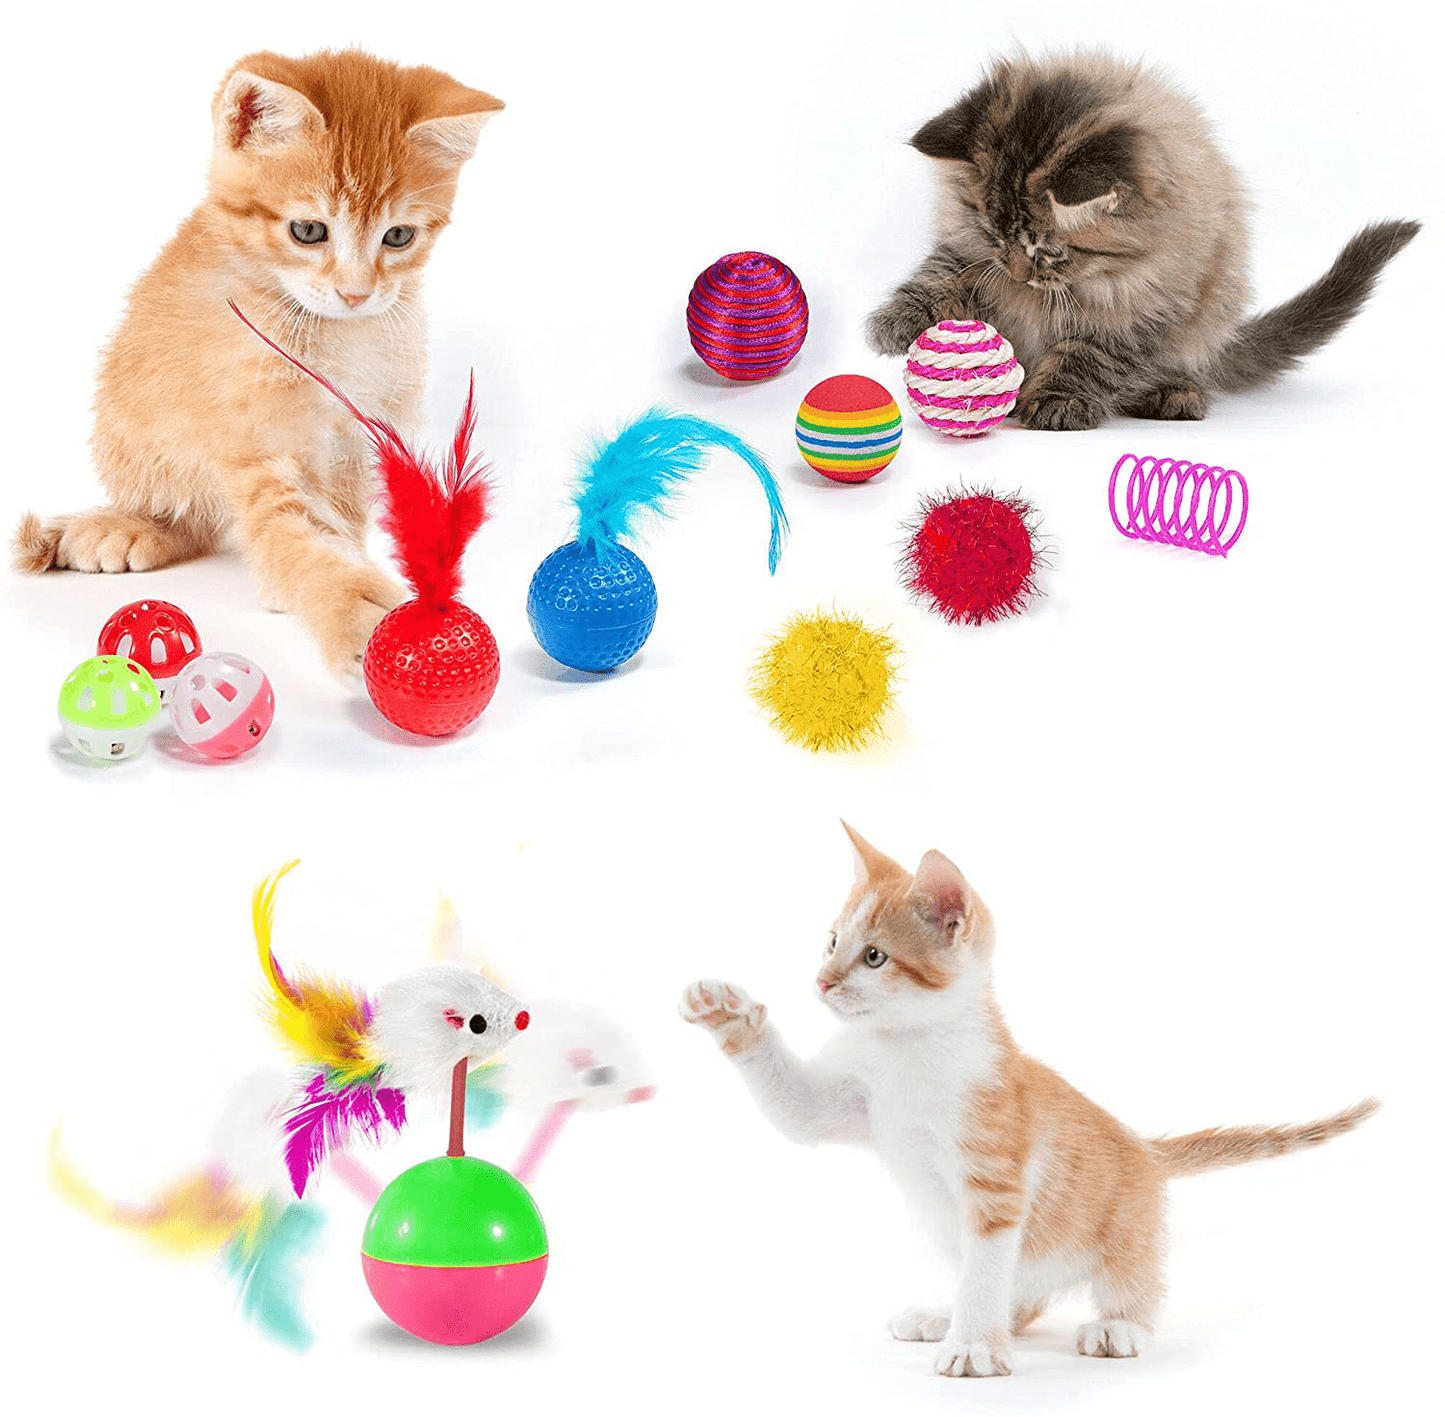 31 PCS Cat Toys Kitten Toys Assortments,Variety Catnip Toy Set Including 2 Way Tunnel,Cat Feather Teaser,Catnip Fish,Mice,Colorful Balls and Bells for Cat,Puppy,Kitty Animals & Pet Supplies > Pet Supplies > Cat Supplies > Cat Toys AILUKI   